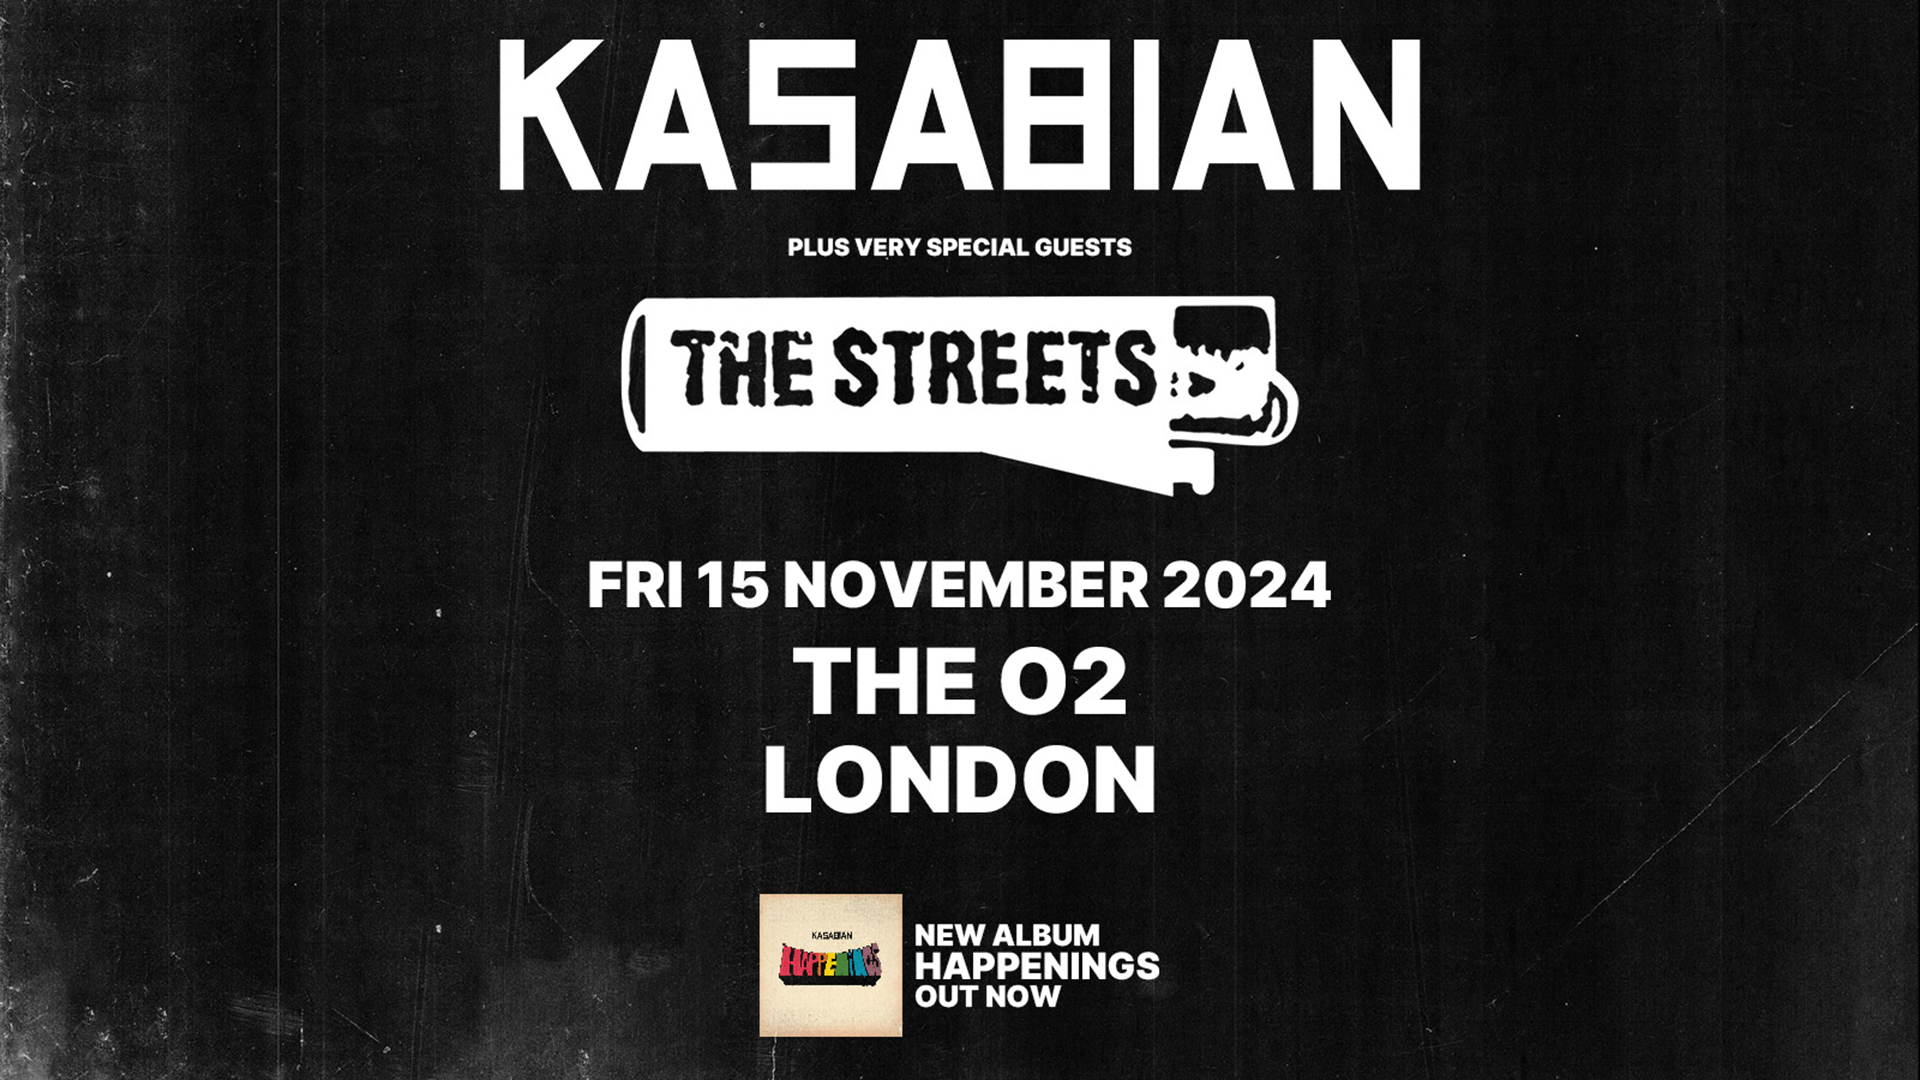 Artwork for Kasabian's show at The O2